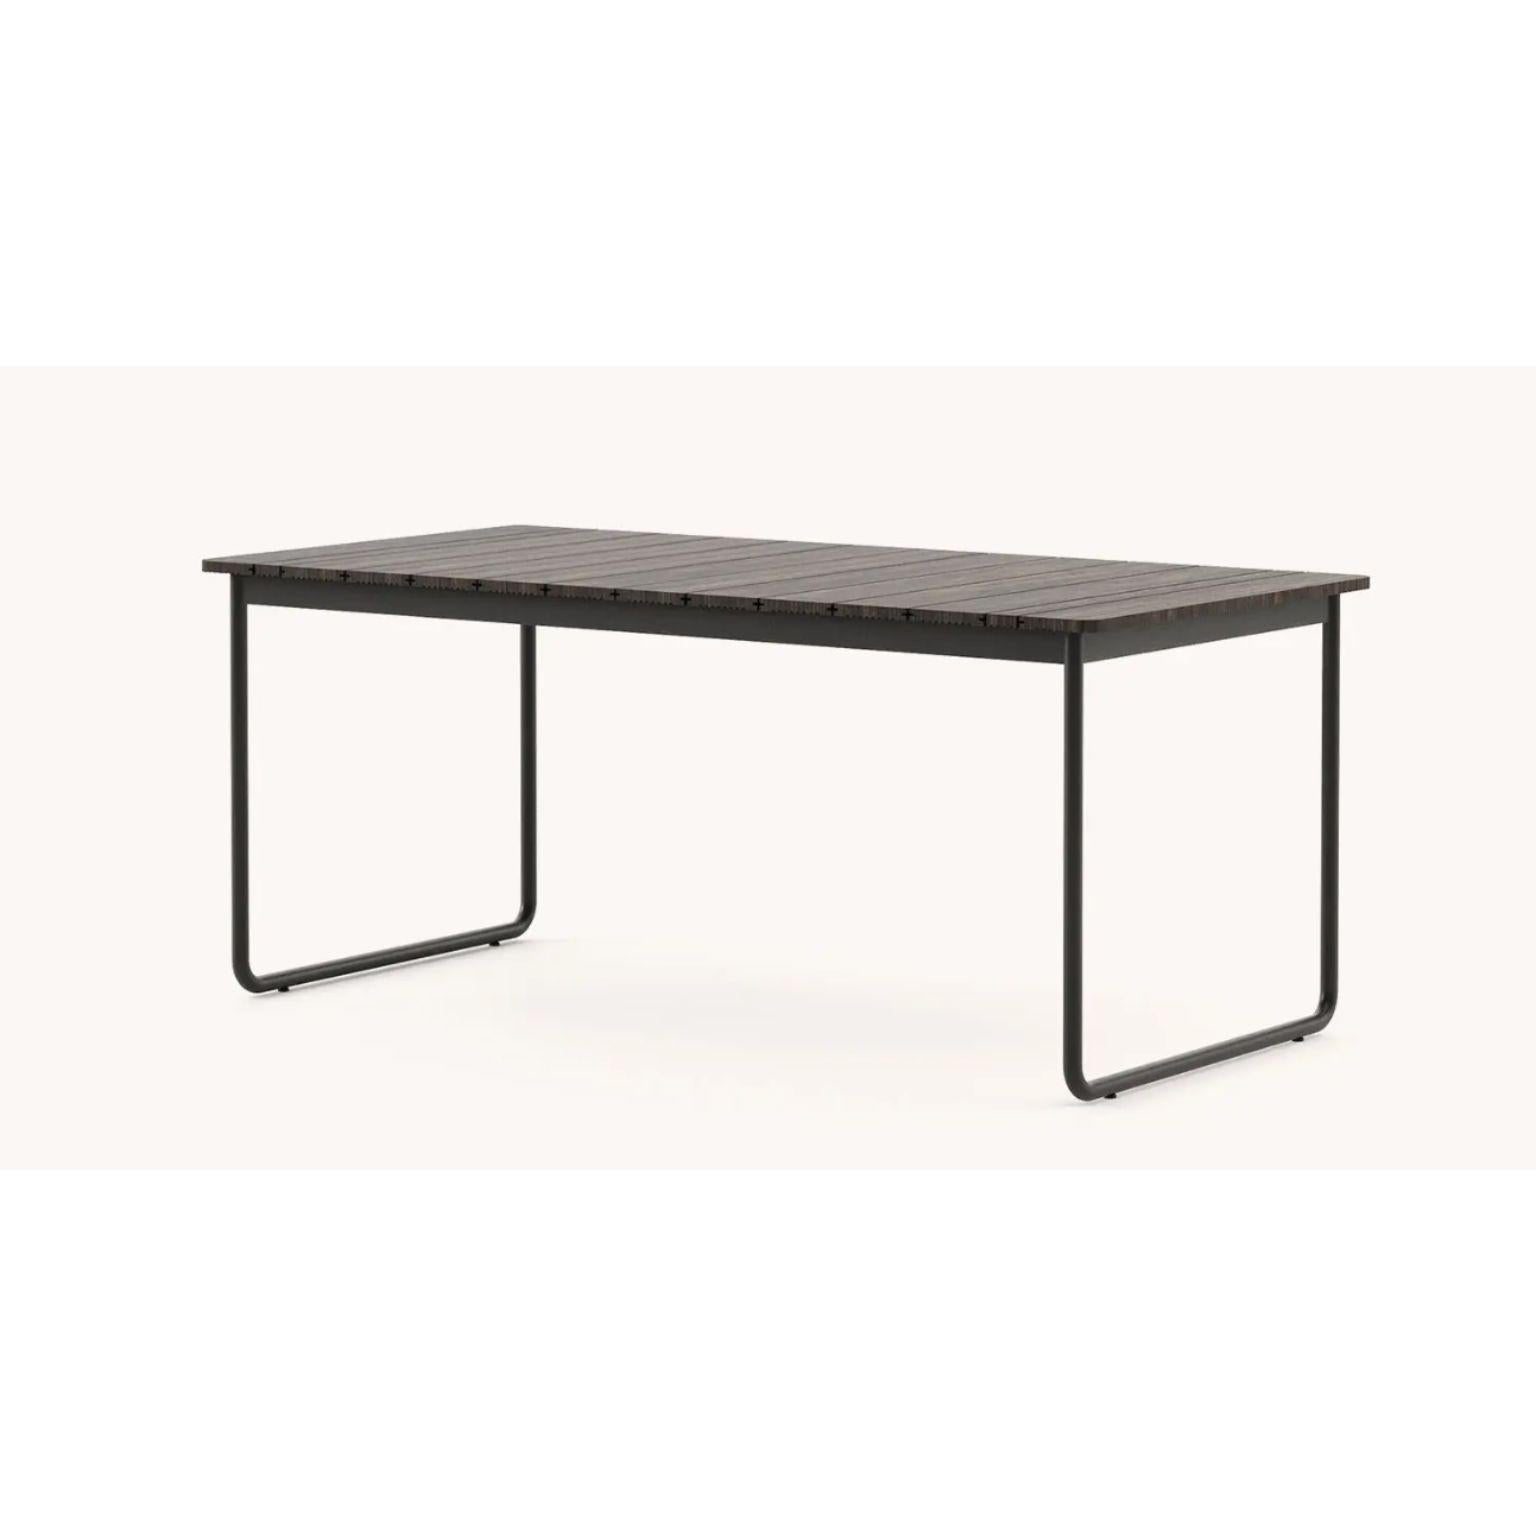 Copacabana dining table by Domkapa.
Materials: black texturized stainless steel, bamboo wood. 
Dimensions: W 180 x D 90 x H 78 cm.
Also available in different materials.

Dining Alfresco has never been this easy. With Copacabana Dining Table,